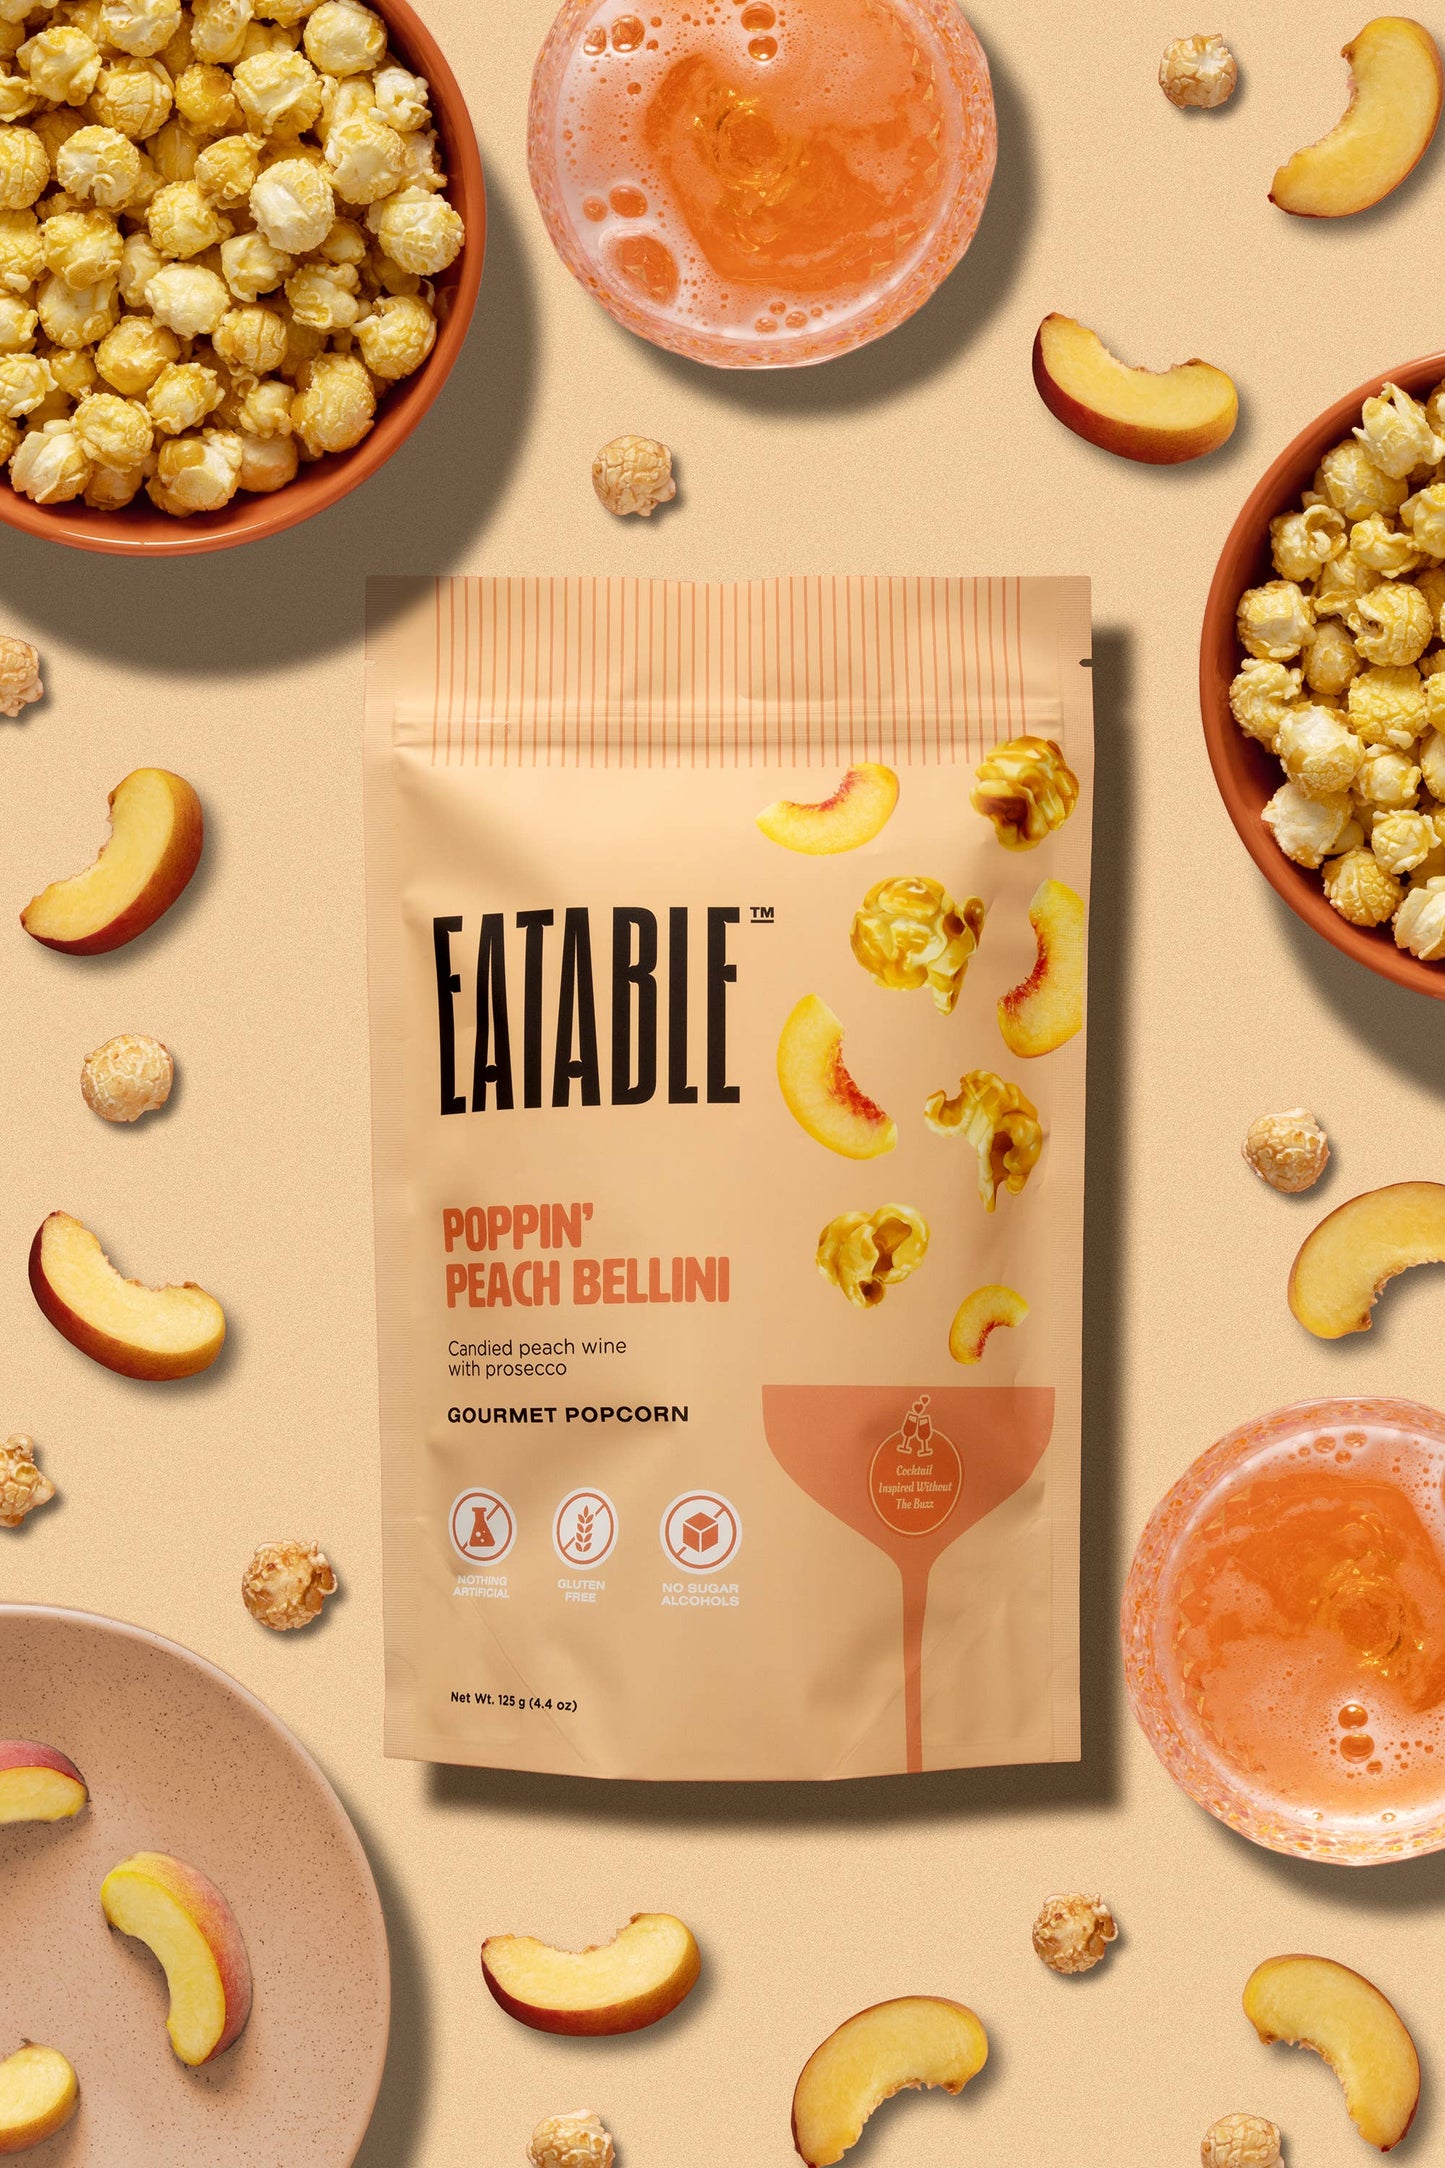 EATABLE Popcorn - Poppin' Peach Bellini (125g) 🍿🍑 Gourmet Candied Popcorn: US Package